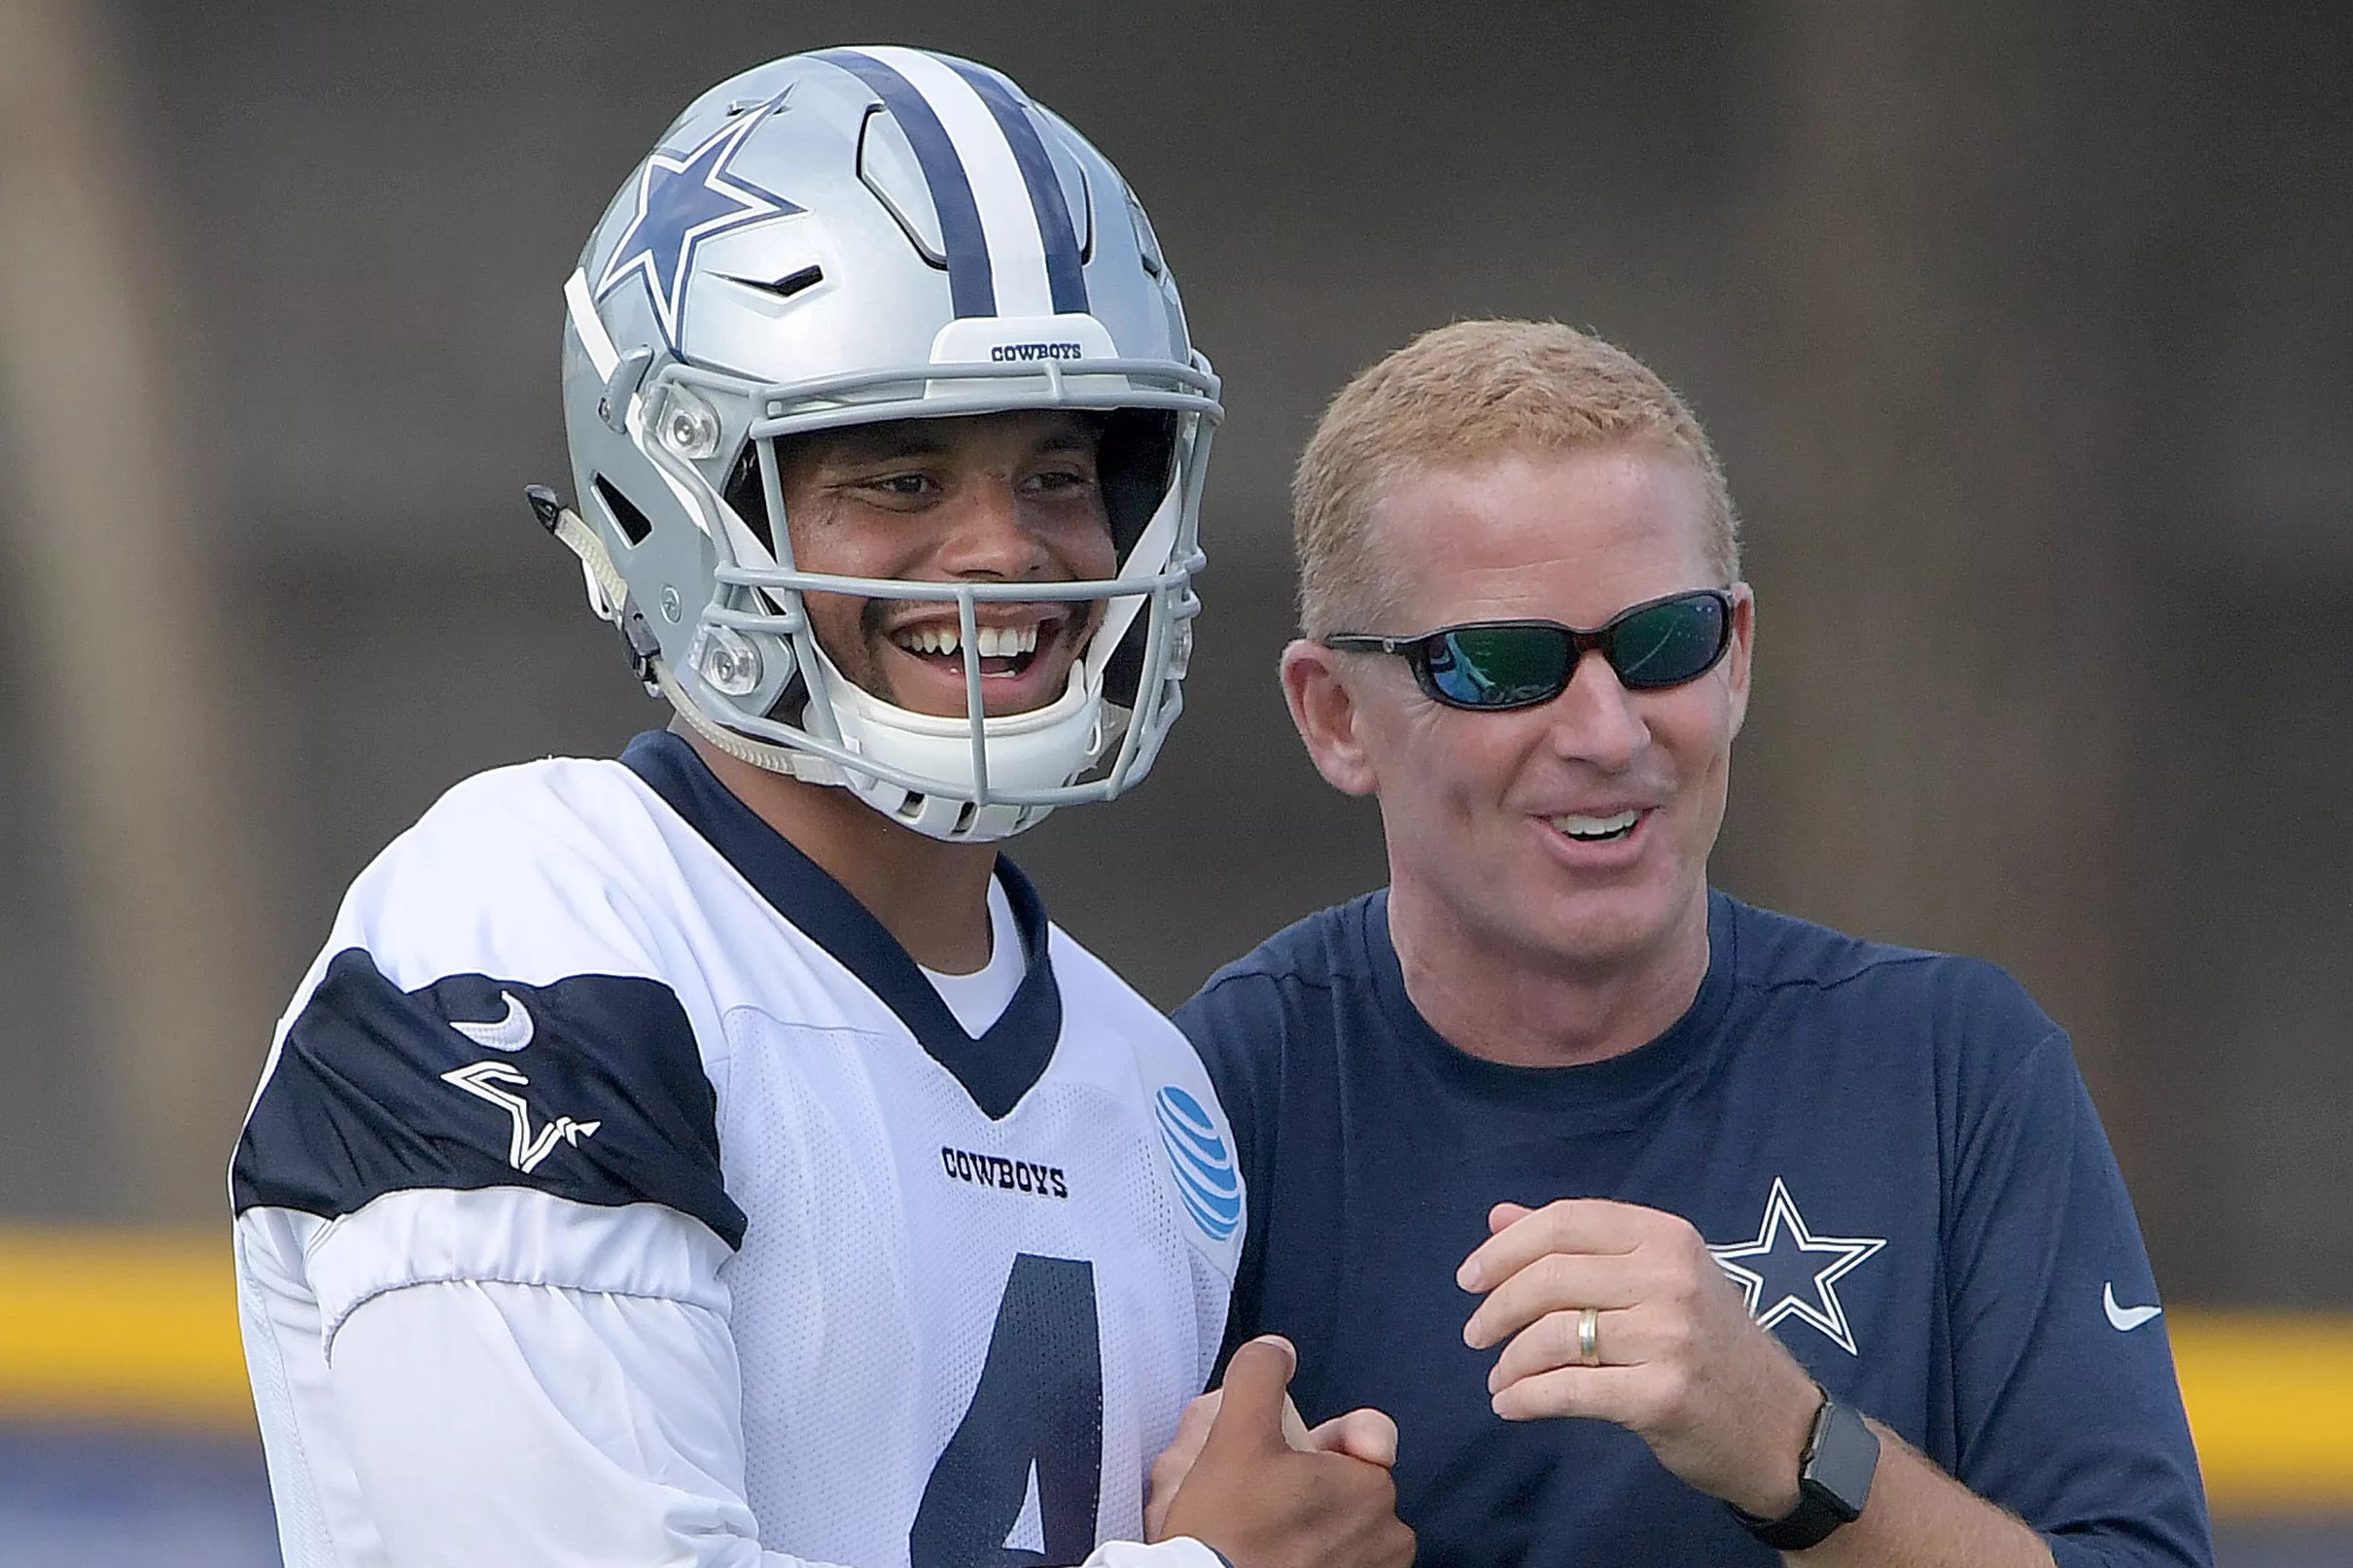 Dallas Cowboys 2018 training camp schedule, dates & times of practices